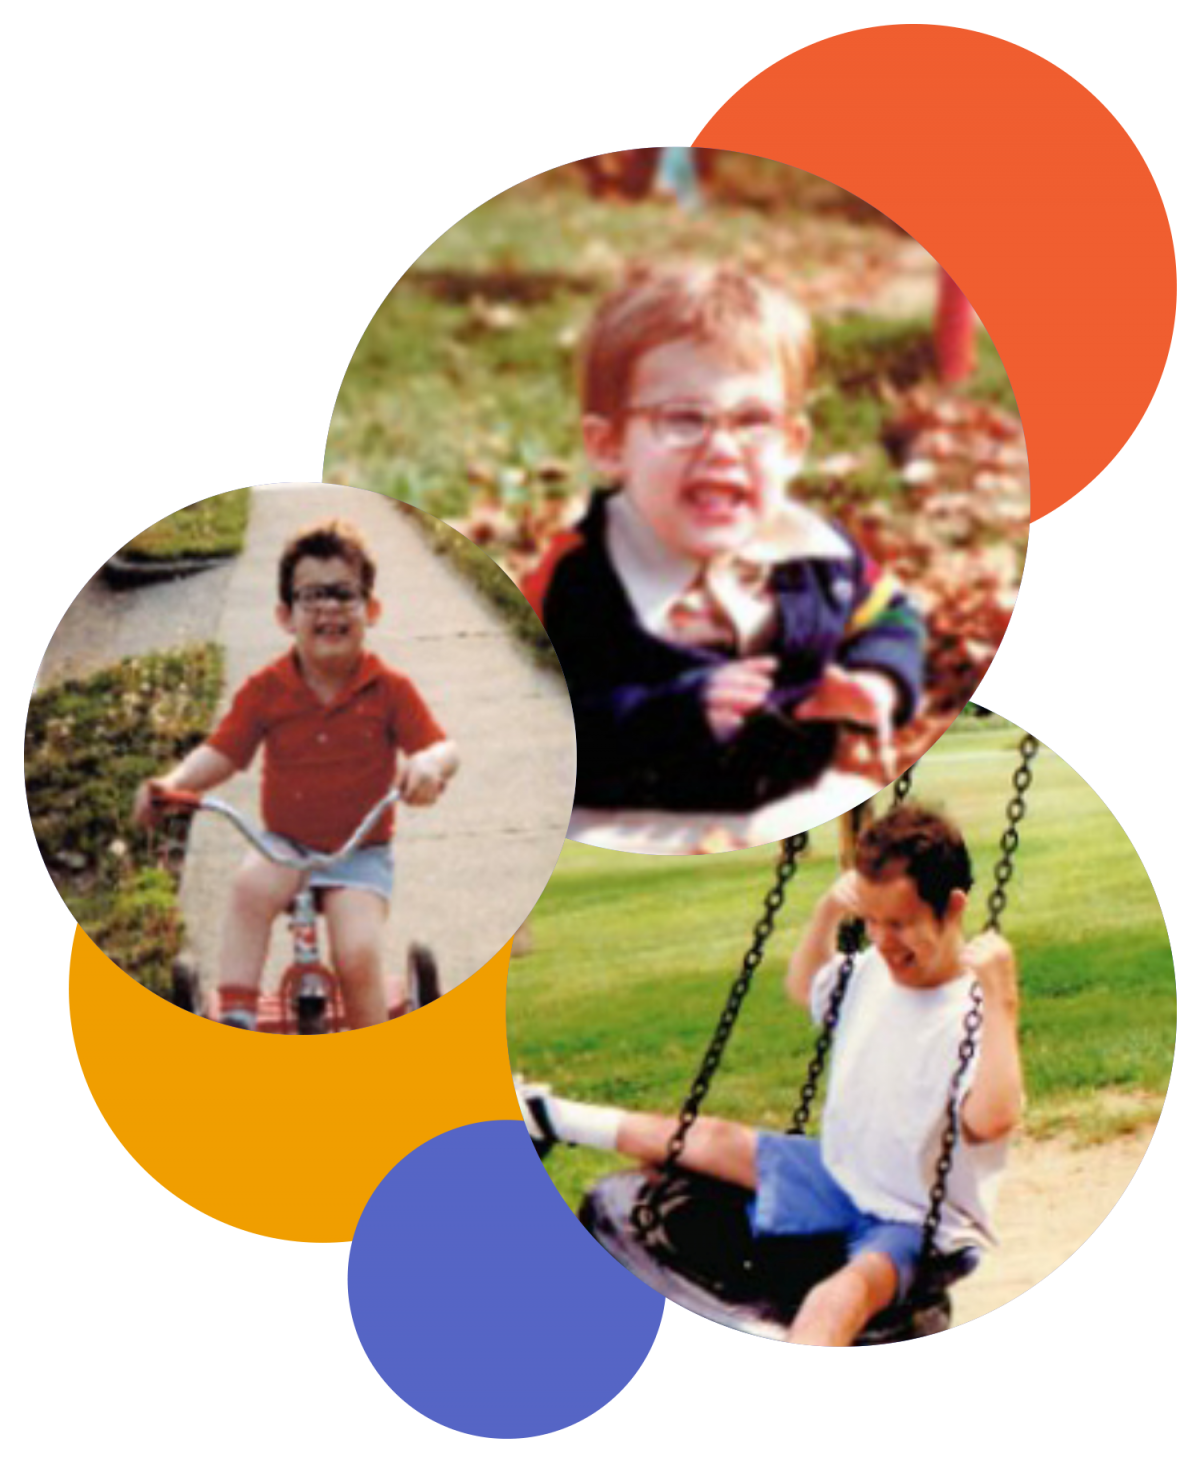 3 young boys with glasses and Lowe syndrome playing